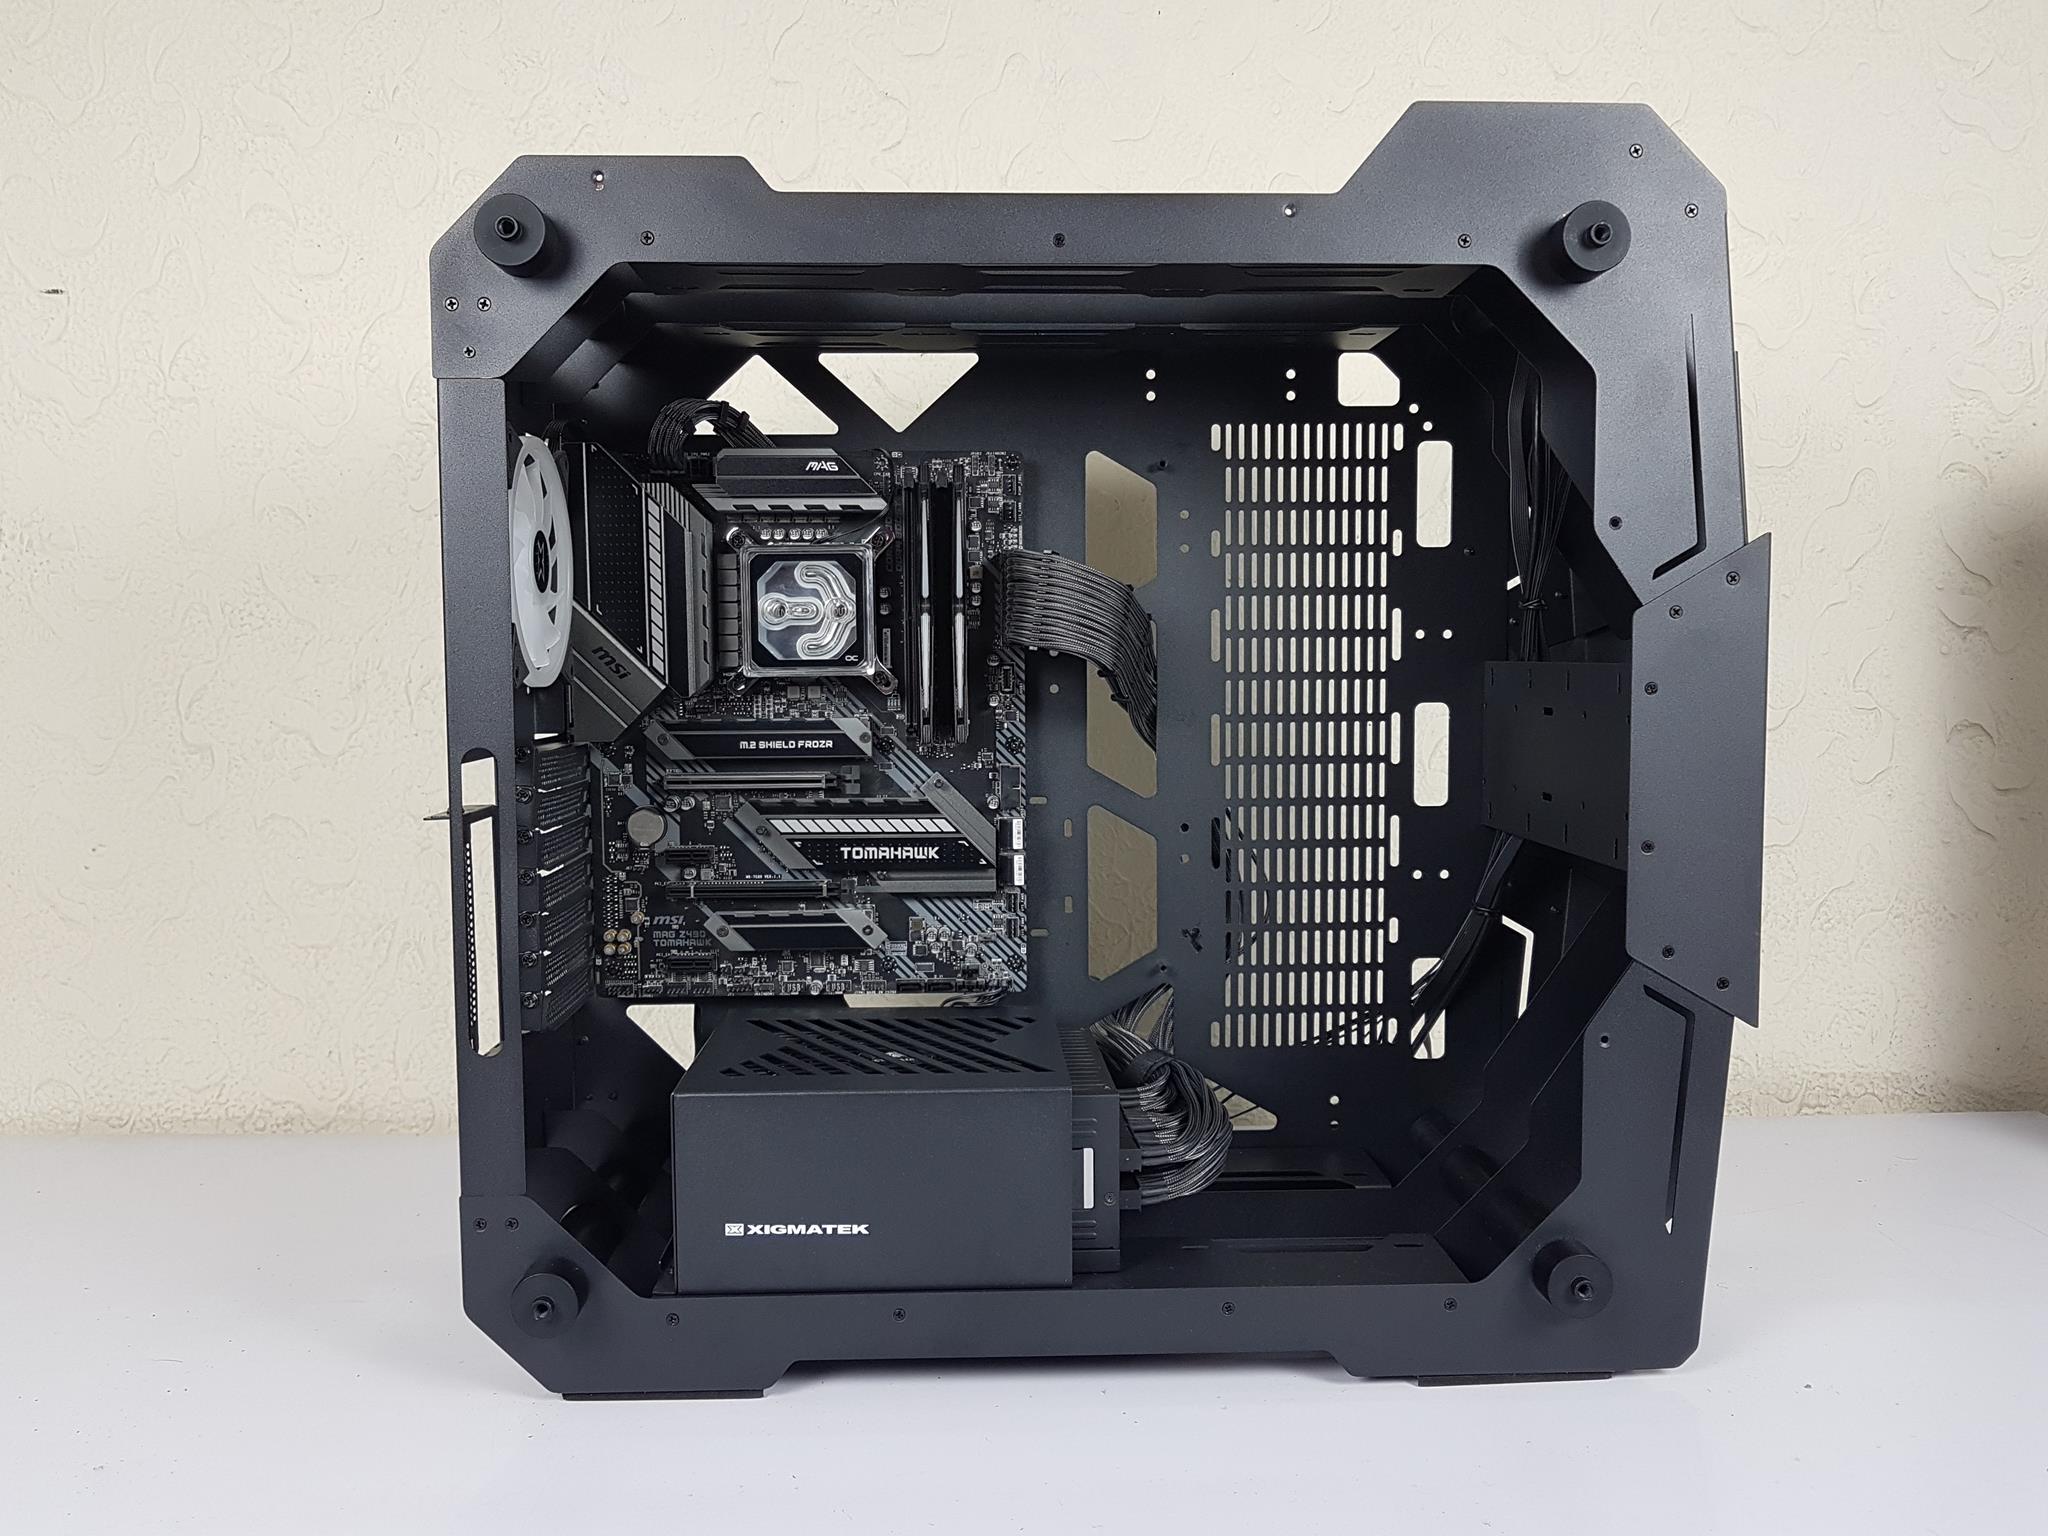 Xigmatek X7 With a motherboard